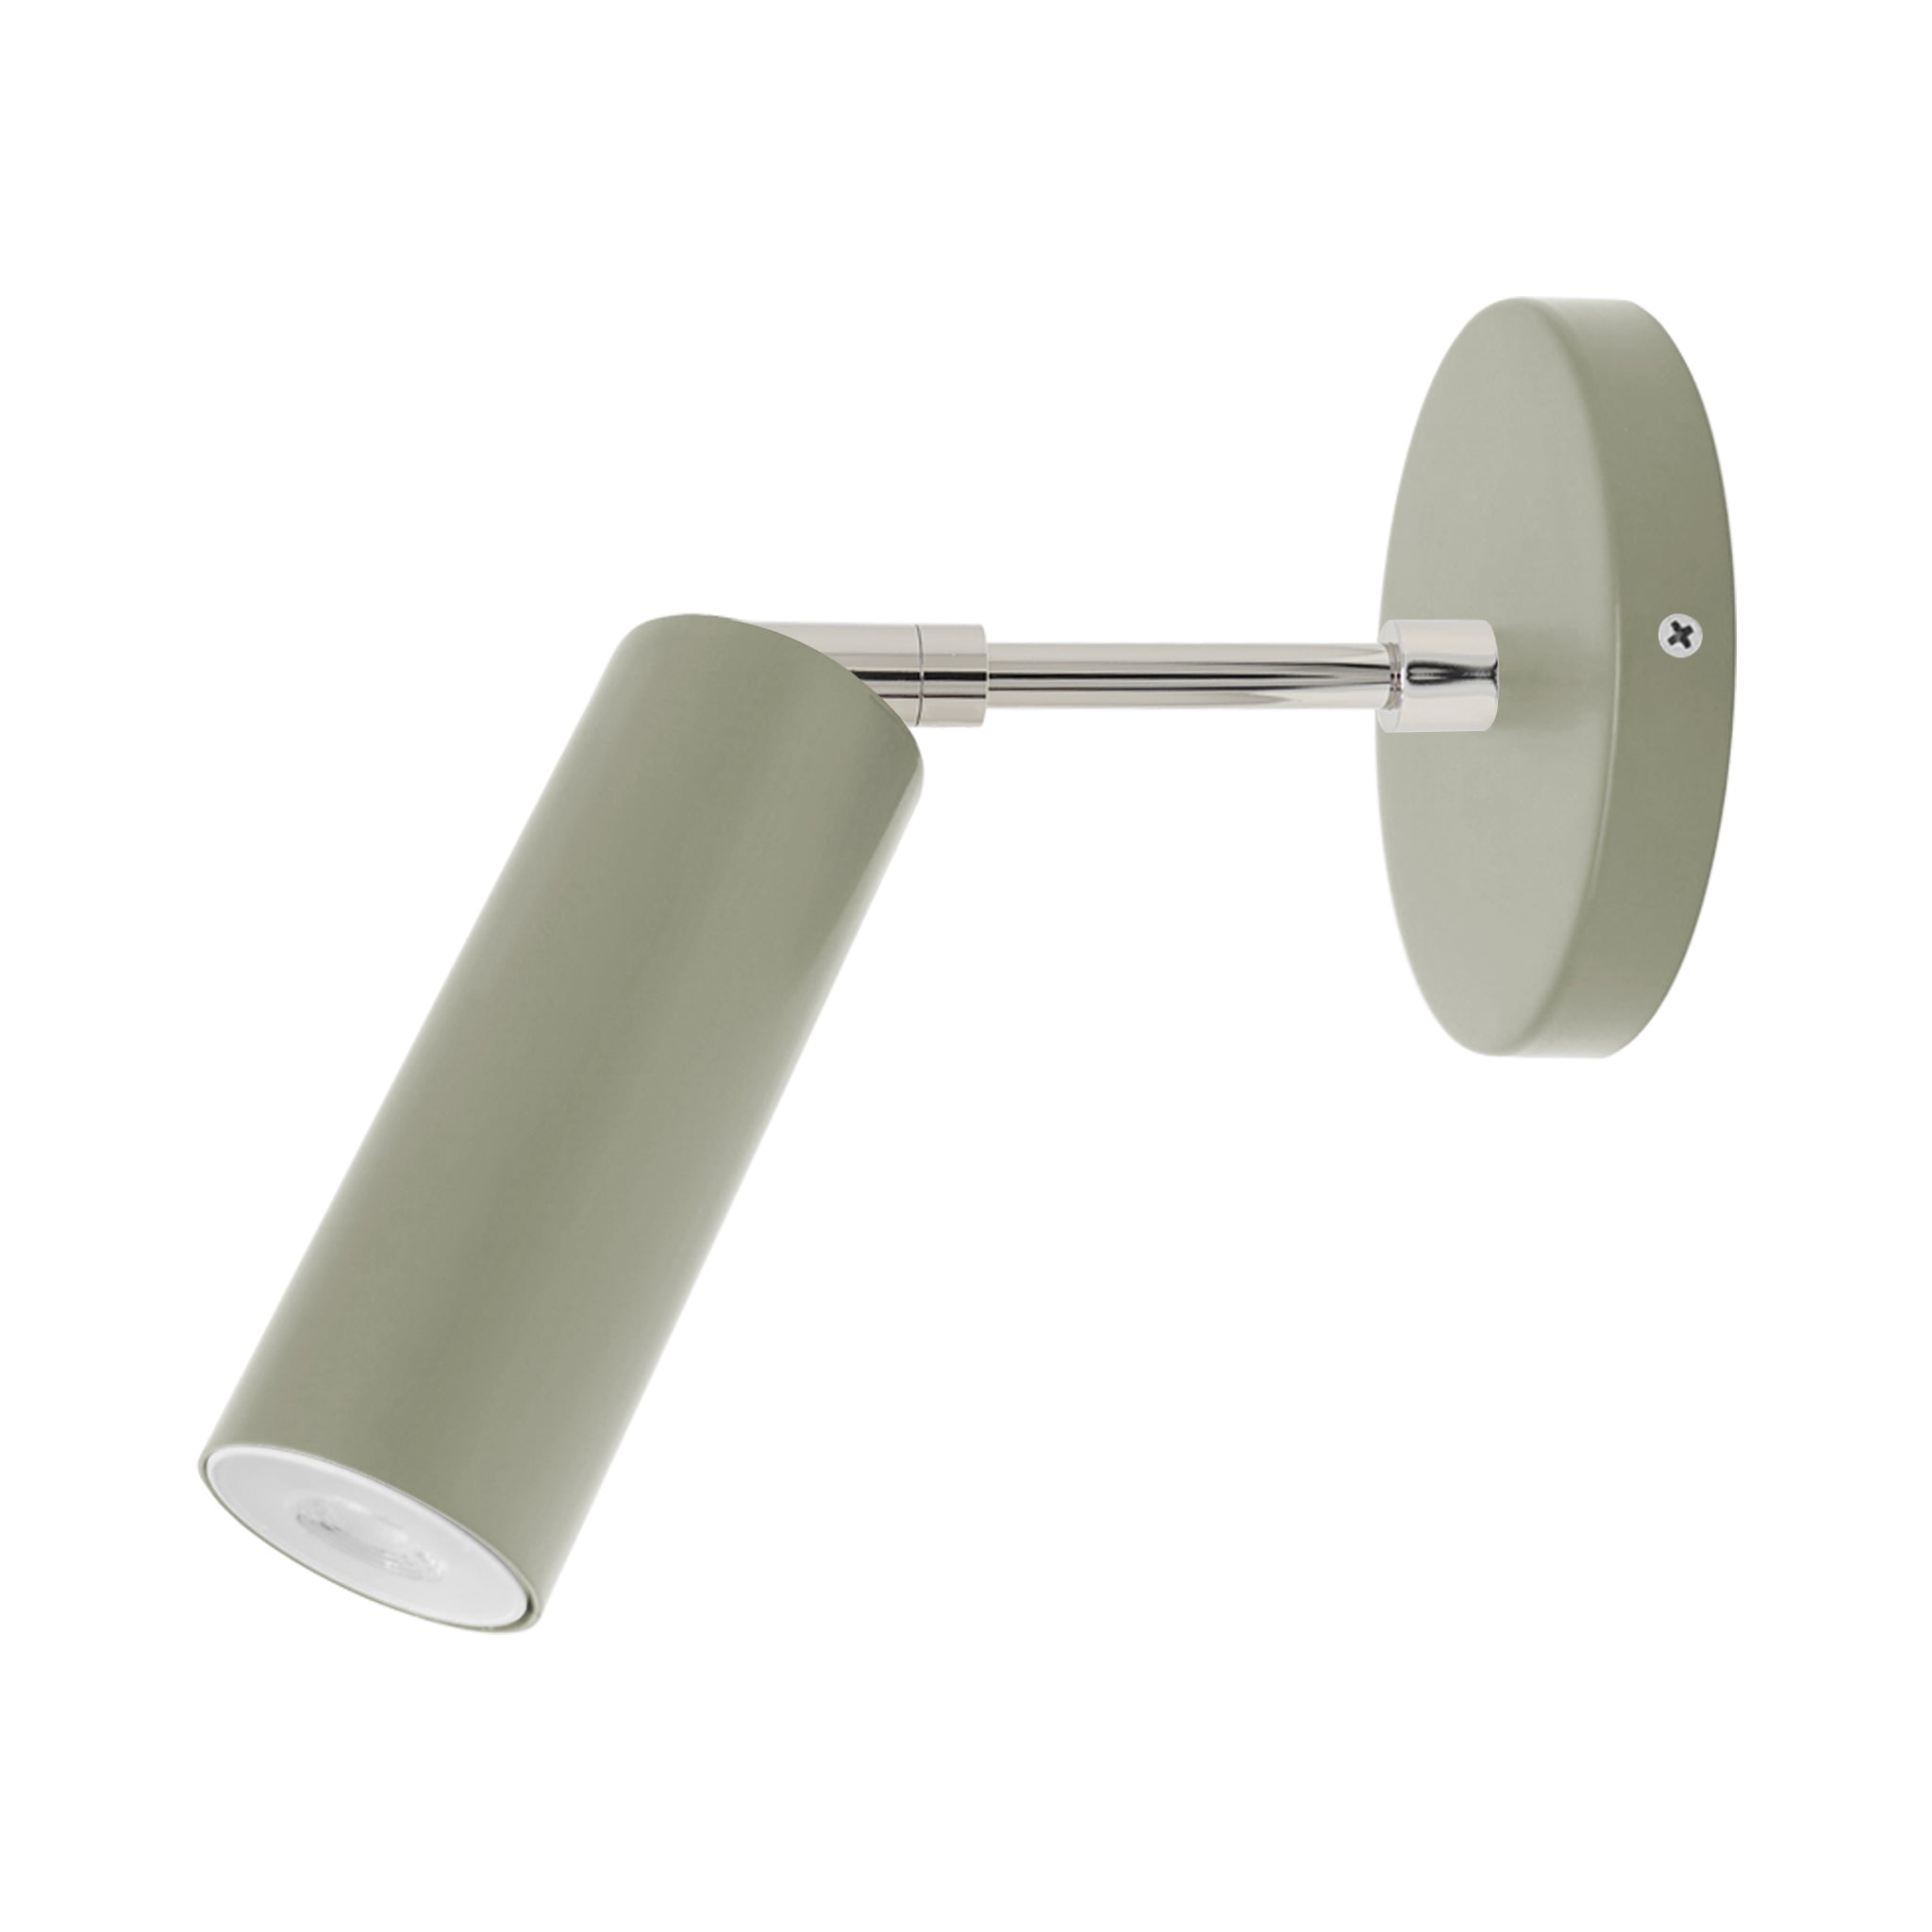 Nickel and python green color Reader sconce 3" arm Dutton Brown lighting